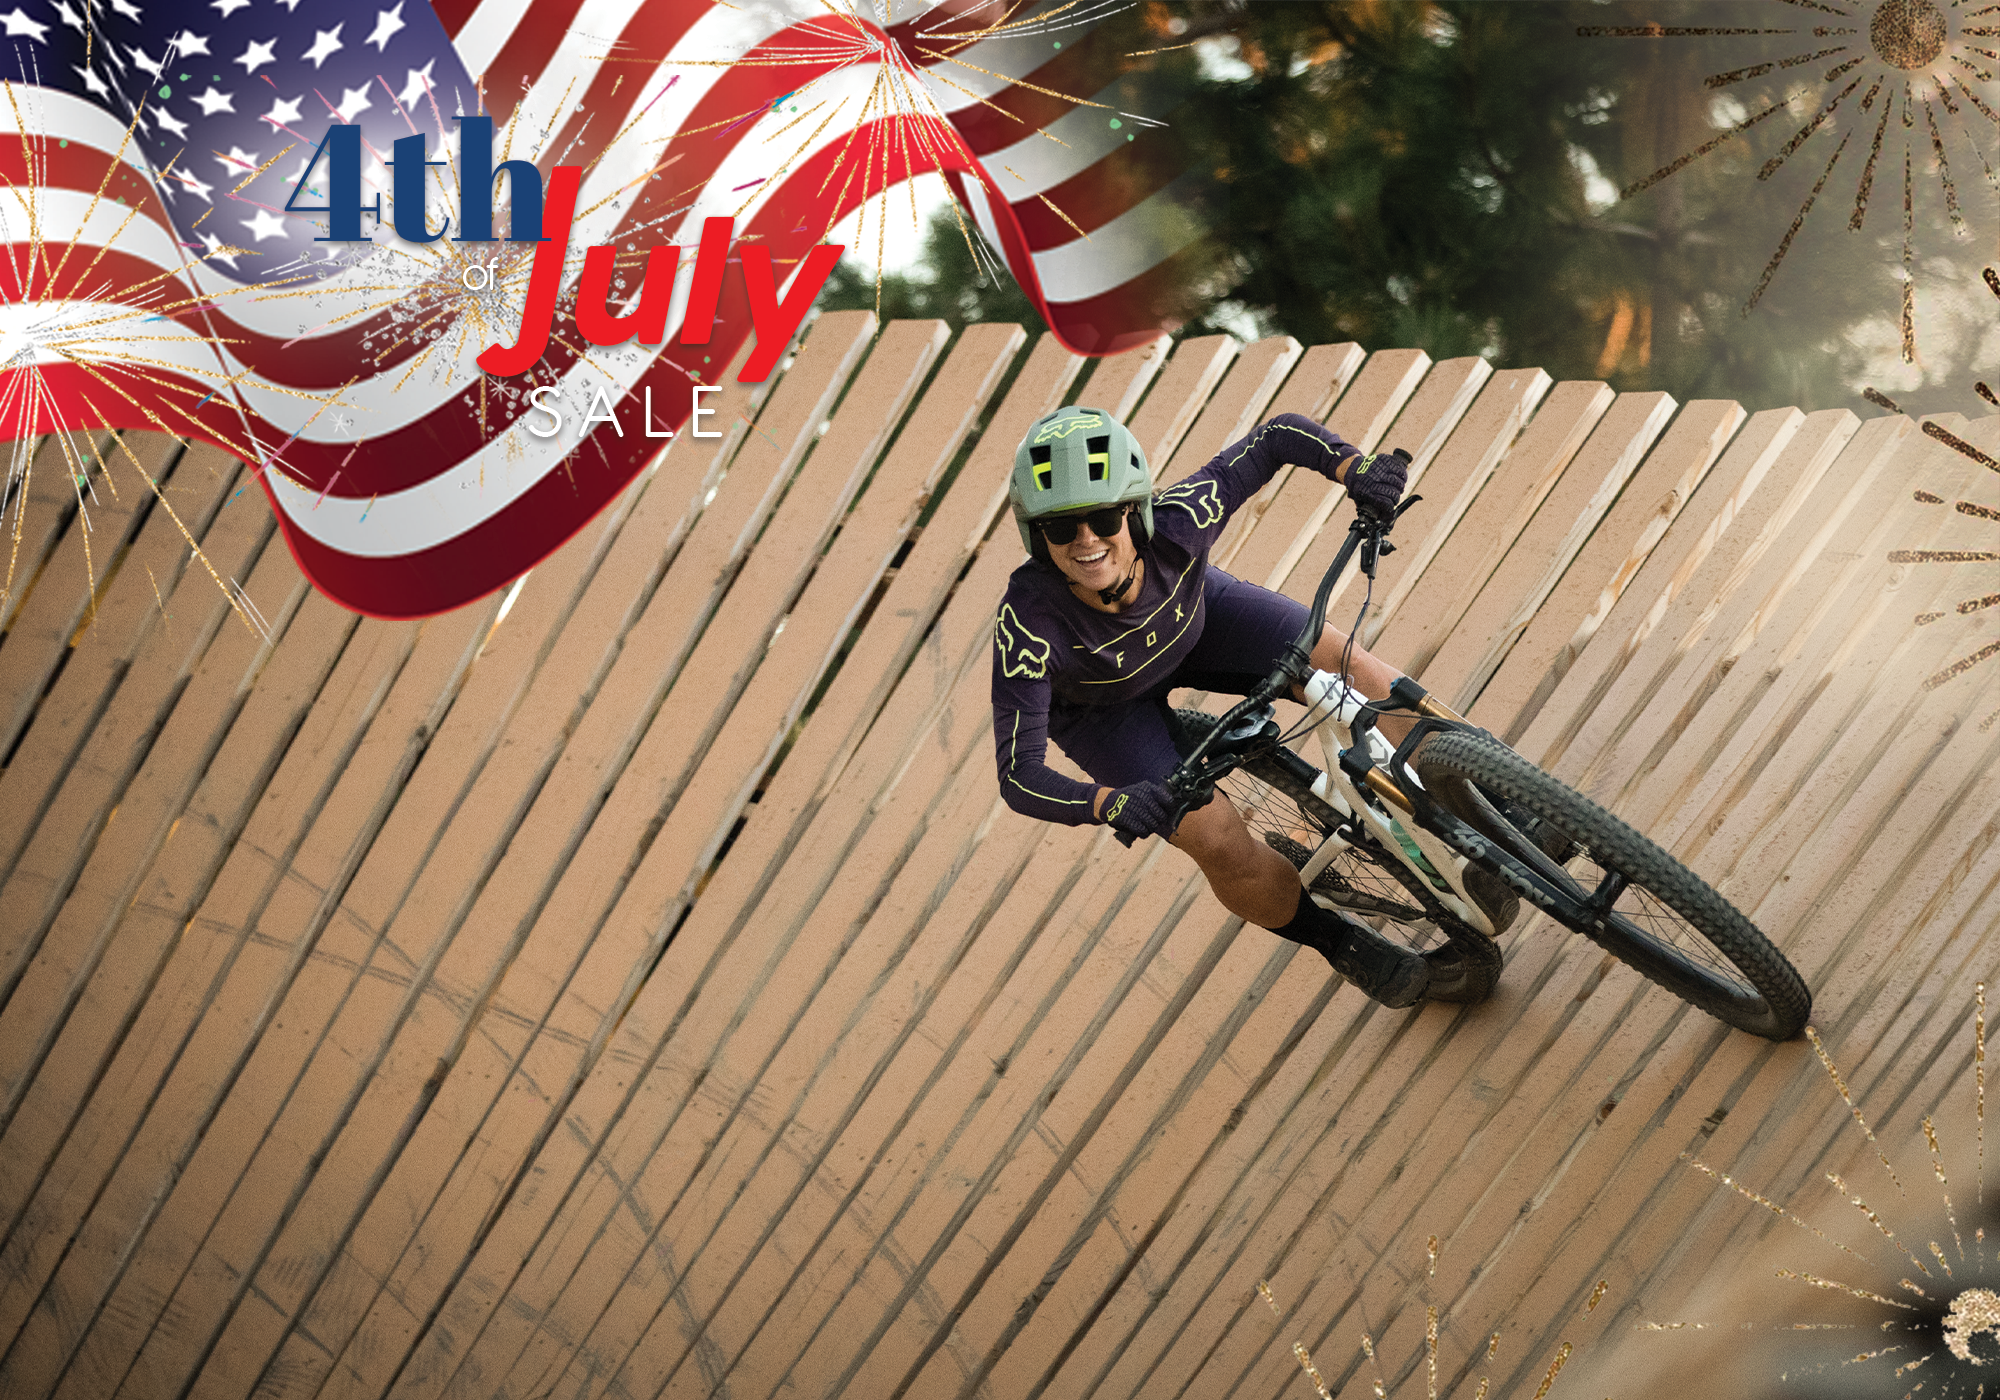 4th of july sale flag and firework logo over an image of a woman mountain biking